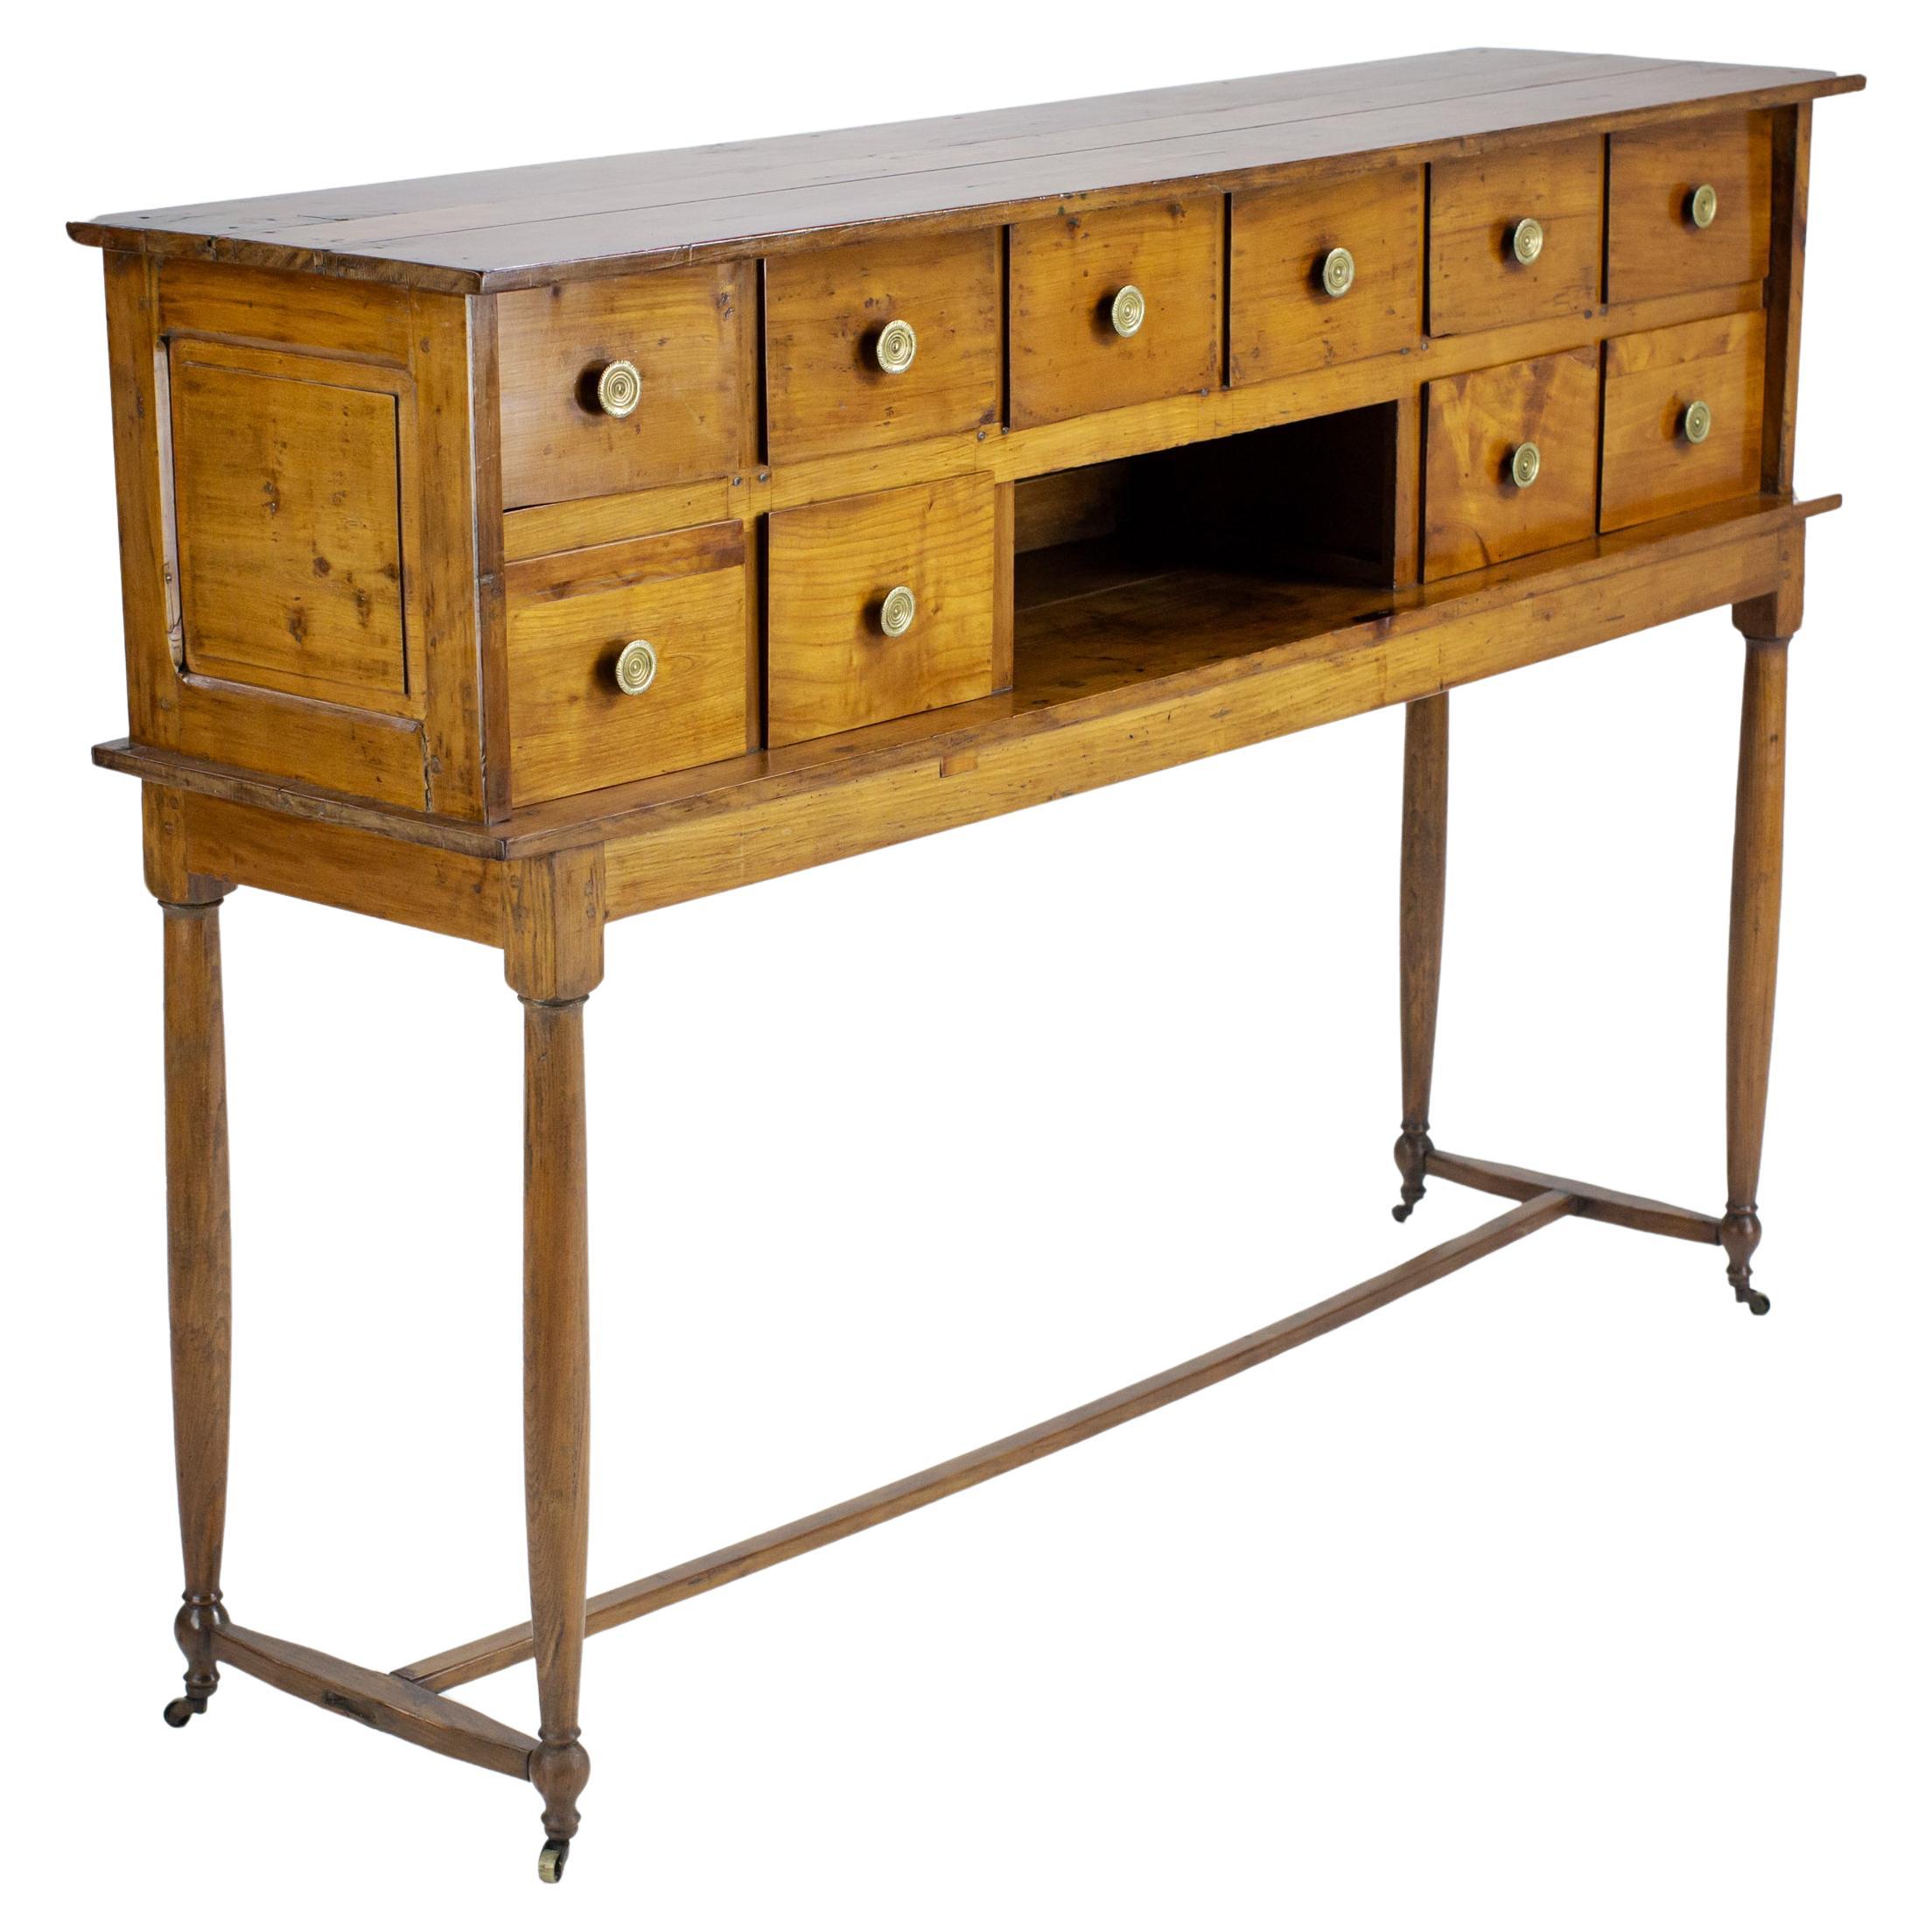 Impressive Cherry Wood Provincial Console with Drawers For Sale